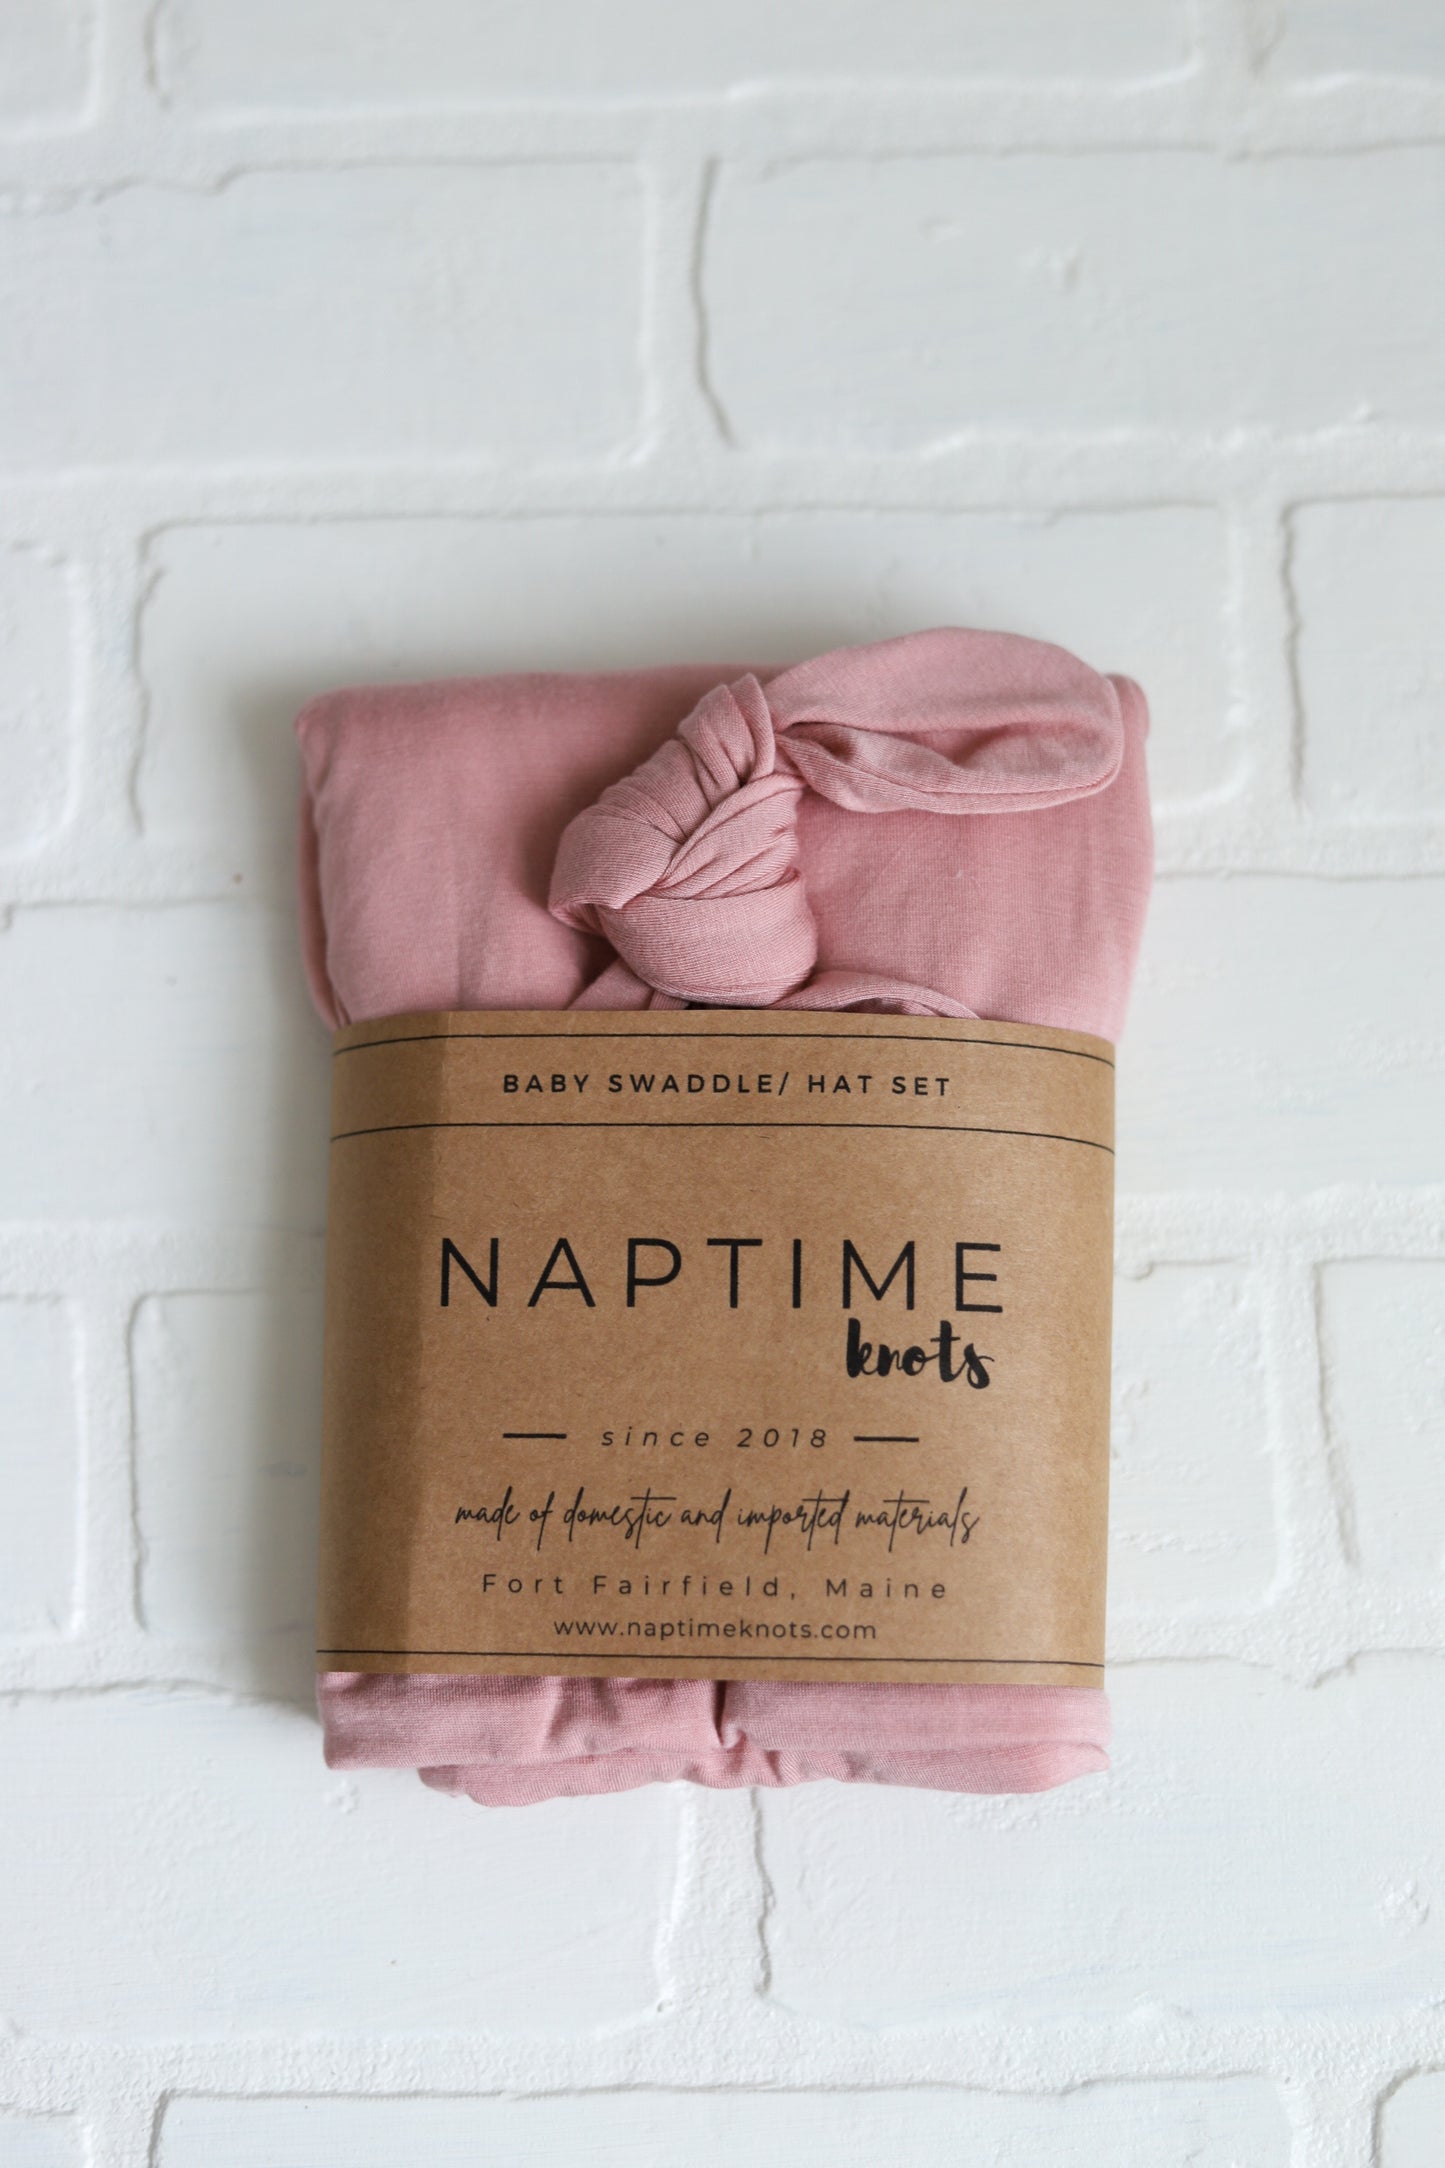 Bamboo NB Top Knot Hat/Swaddle Sets - Various Color Options!